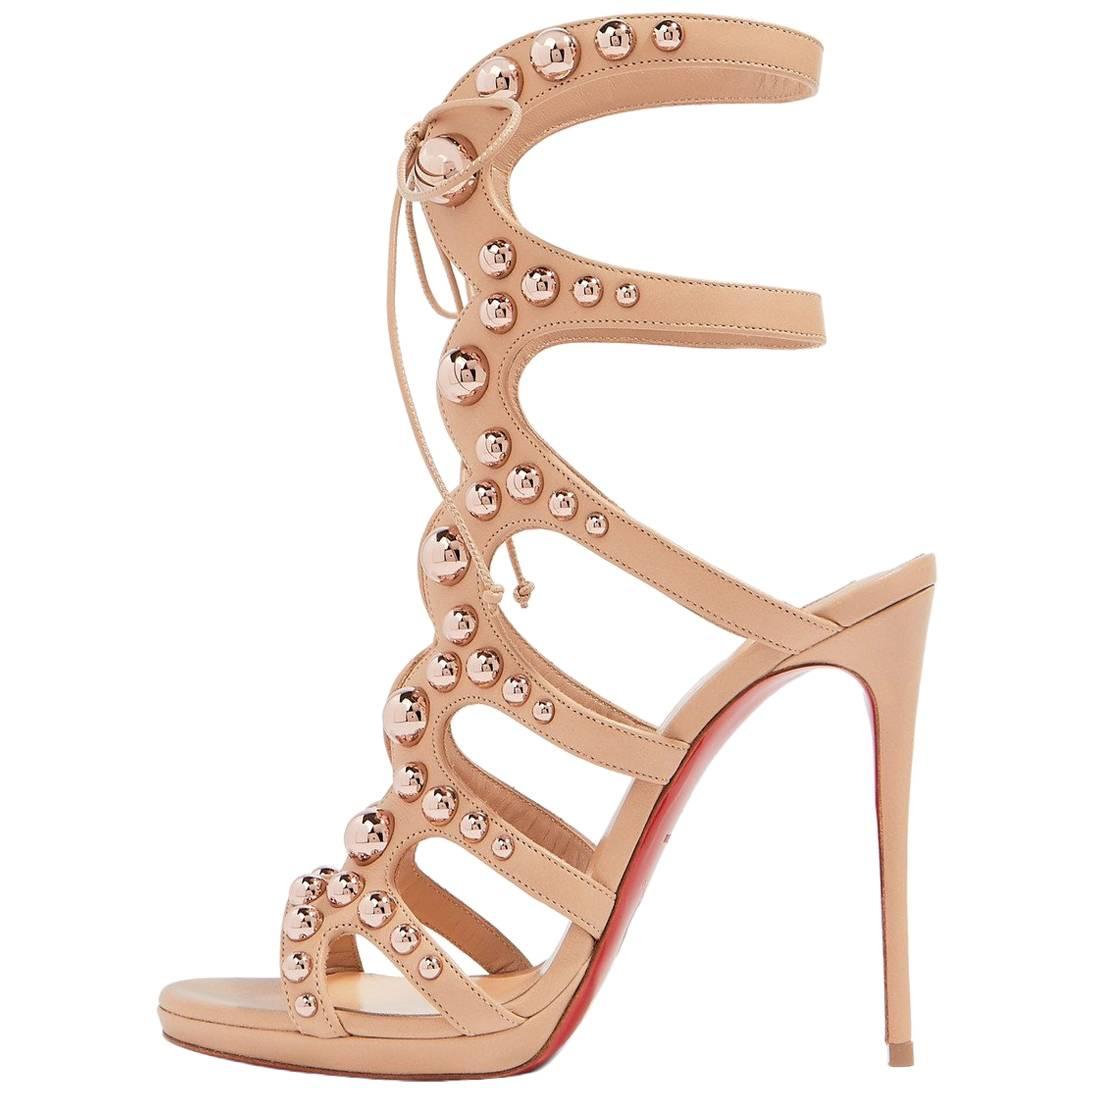 Christian Louboutin Nude Leather Rose Gold Gladiator Sandals Heels 